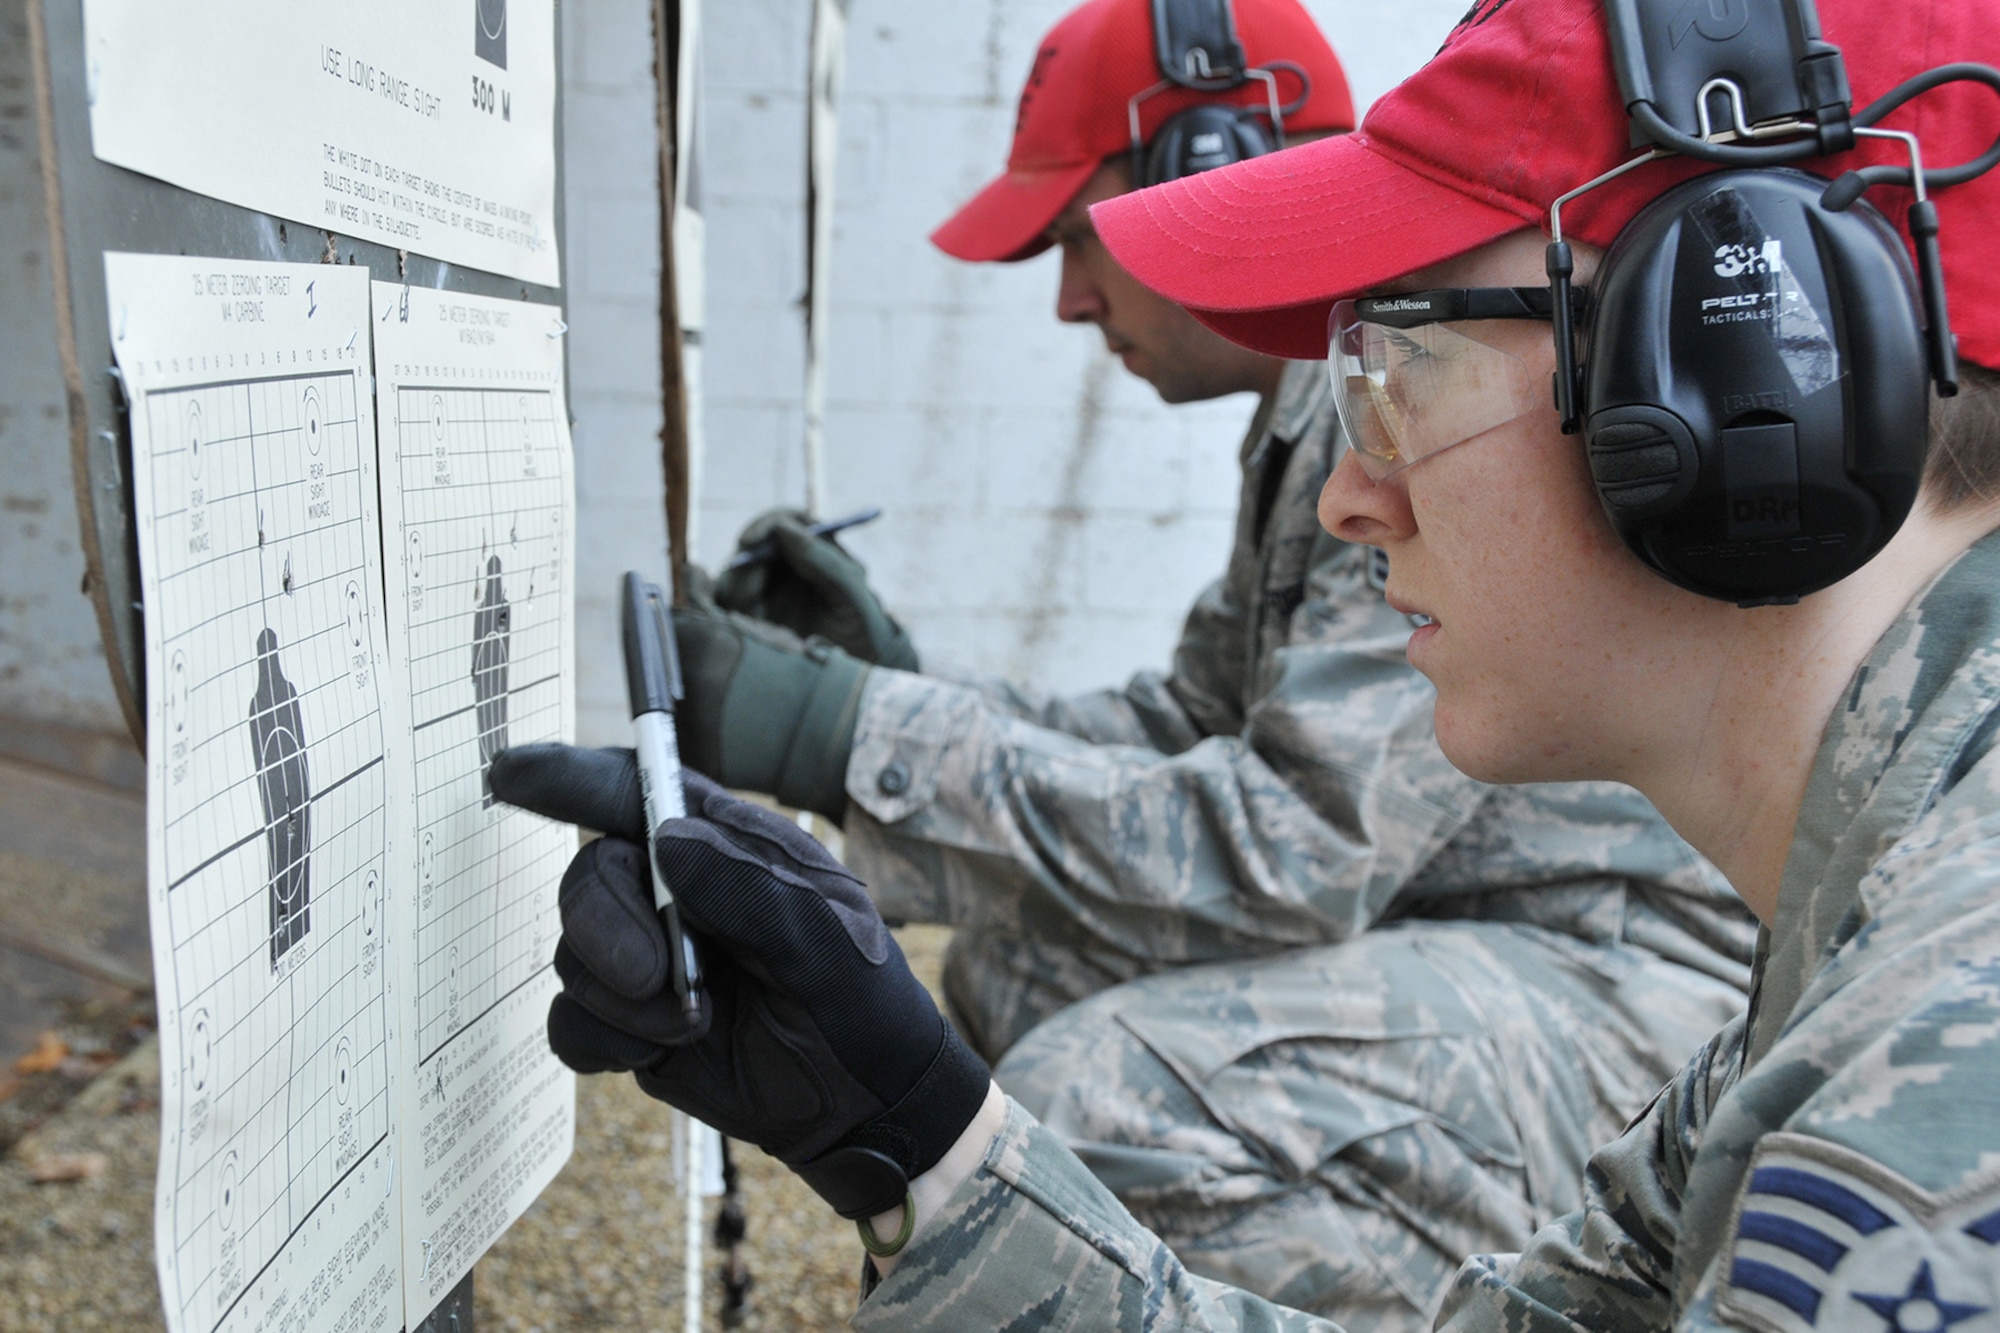 Senior Airman Danielle Massengill, a Combat Arms Instructor with the 910th Security Forces Squadron, reviews her hits on a target at the range here after firing an M-4 carbine, Dec. 3, 2016. The 910th’s Combat Arms Instructors schedule this training during less busy times of year to current on their qualifications to be able to teach others who need training on the weapon. The M-4 carbine is a shorter and lighter variant of the M16A2 assault rifle and is the primary long weapon for Air Force personnel deployed to combat areas. (U.S. Air Force photo/Staff. Sgt. Rachel Kocin)